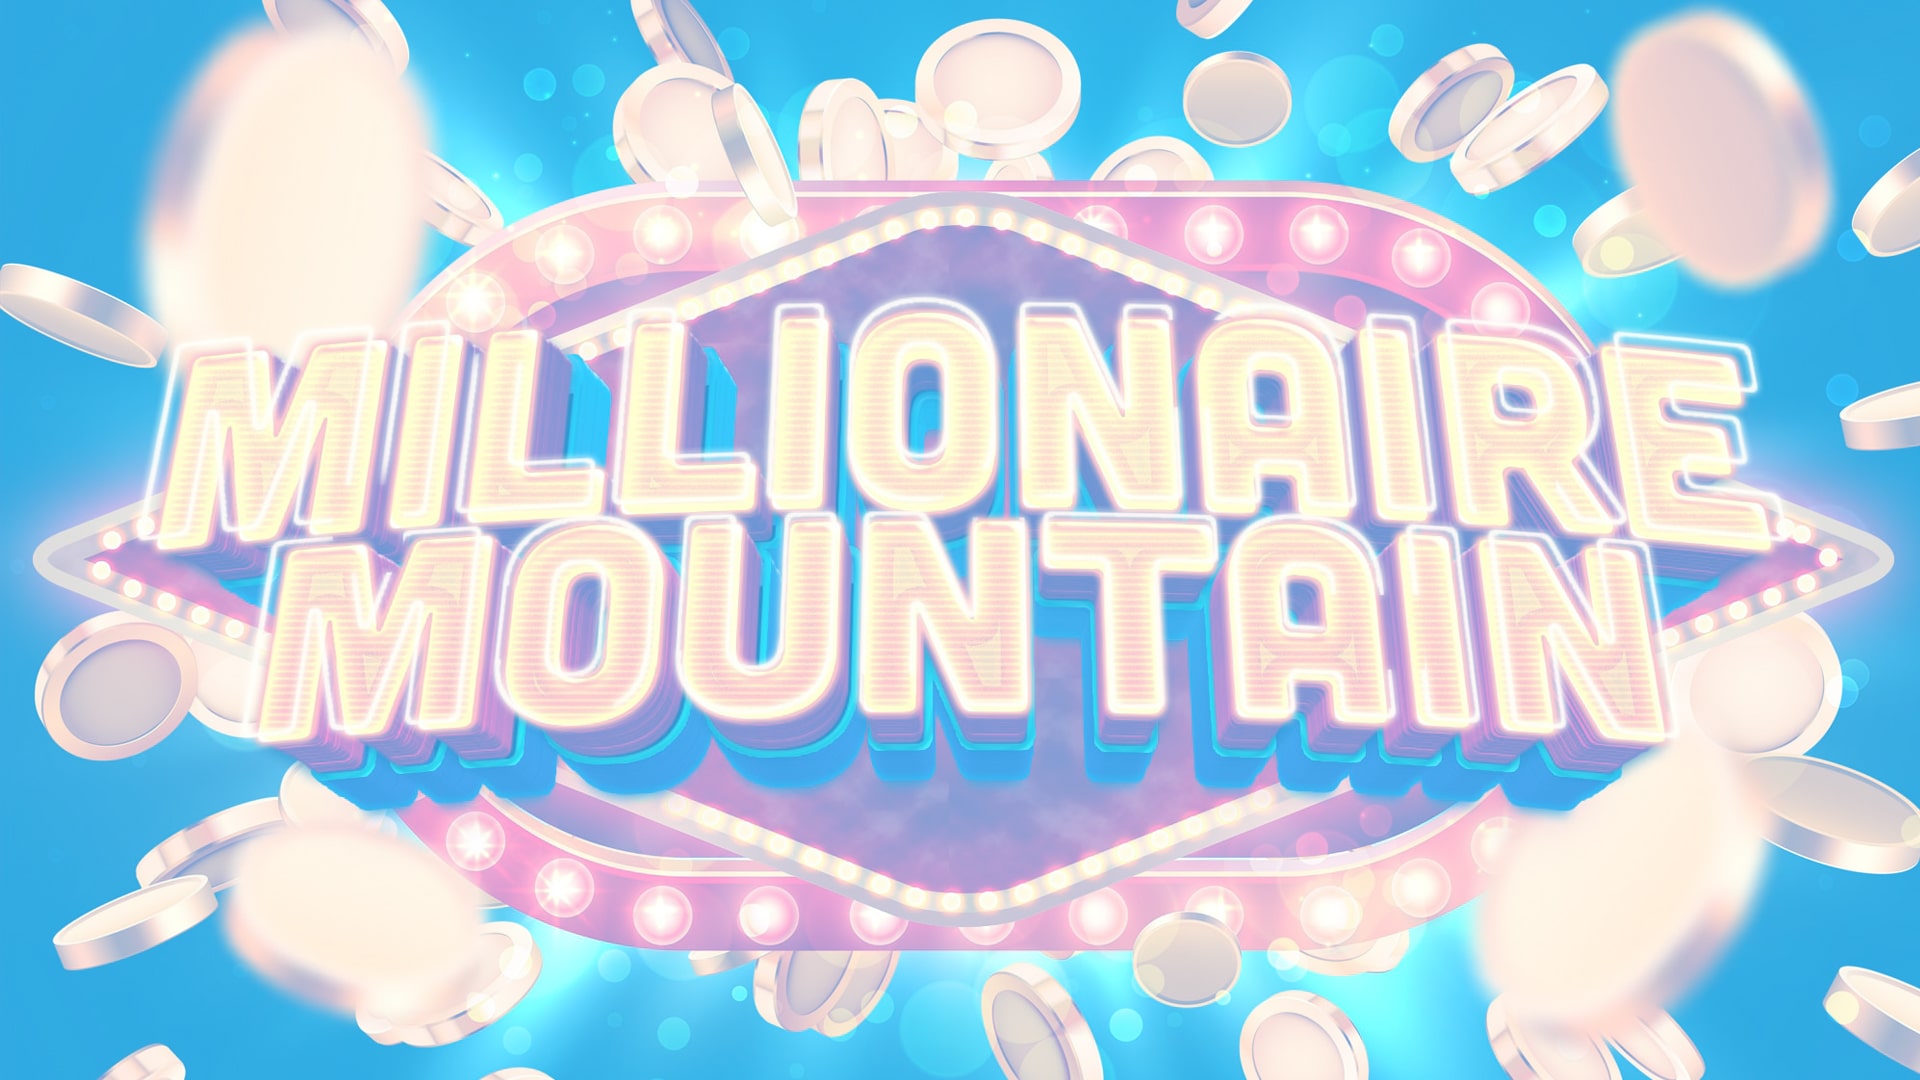 “Millionaire Mountain” Reaches Quarter Finals of Outstanding Screenplays TV Pilot Competition 2021